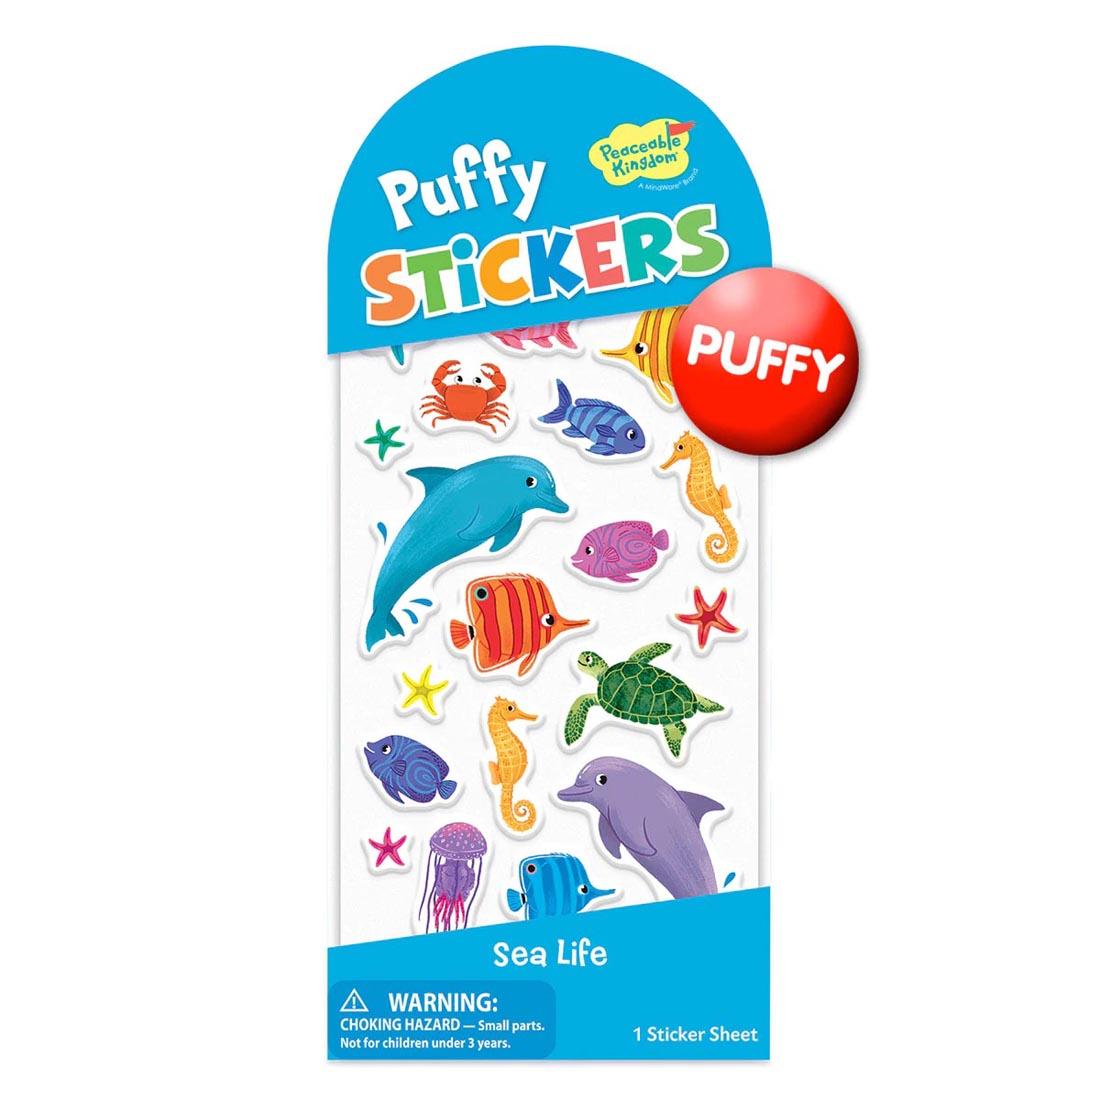 Sea Life Puffy Stickers by Peaceable Kingdom with a red button overlay that says Puffy